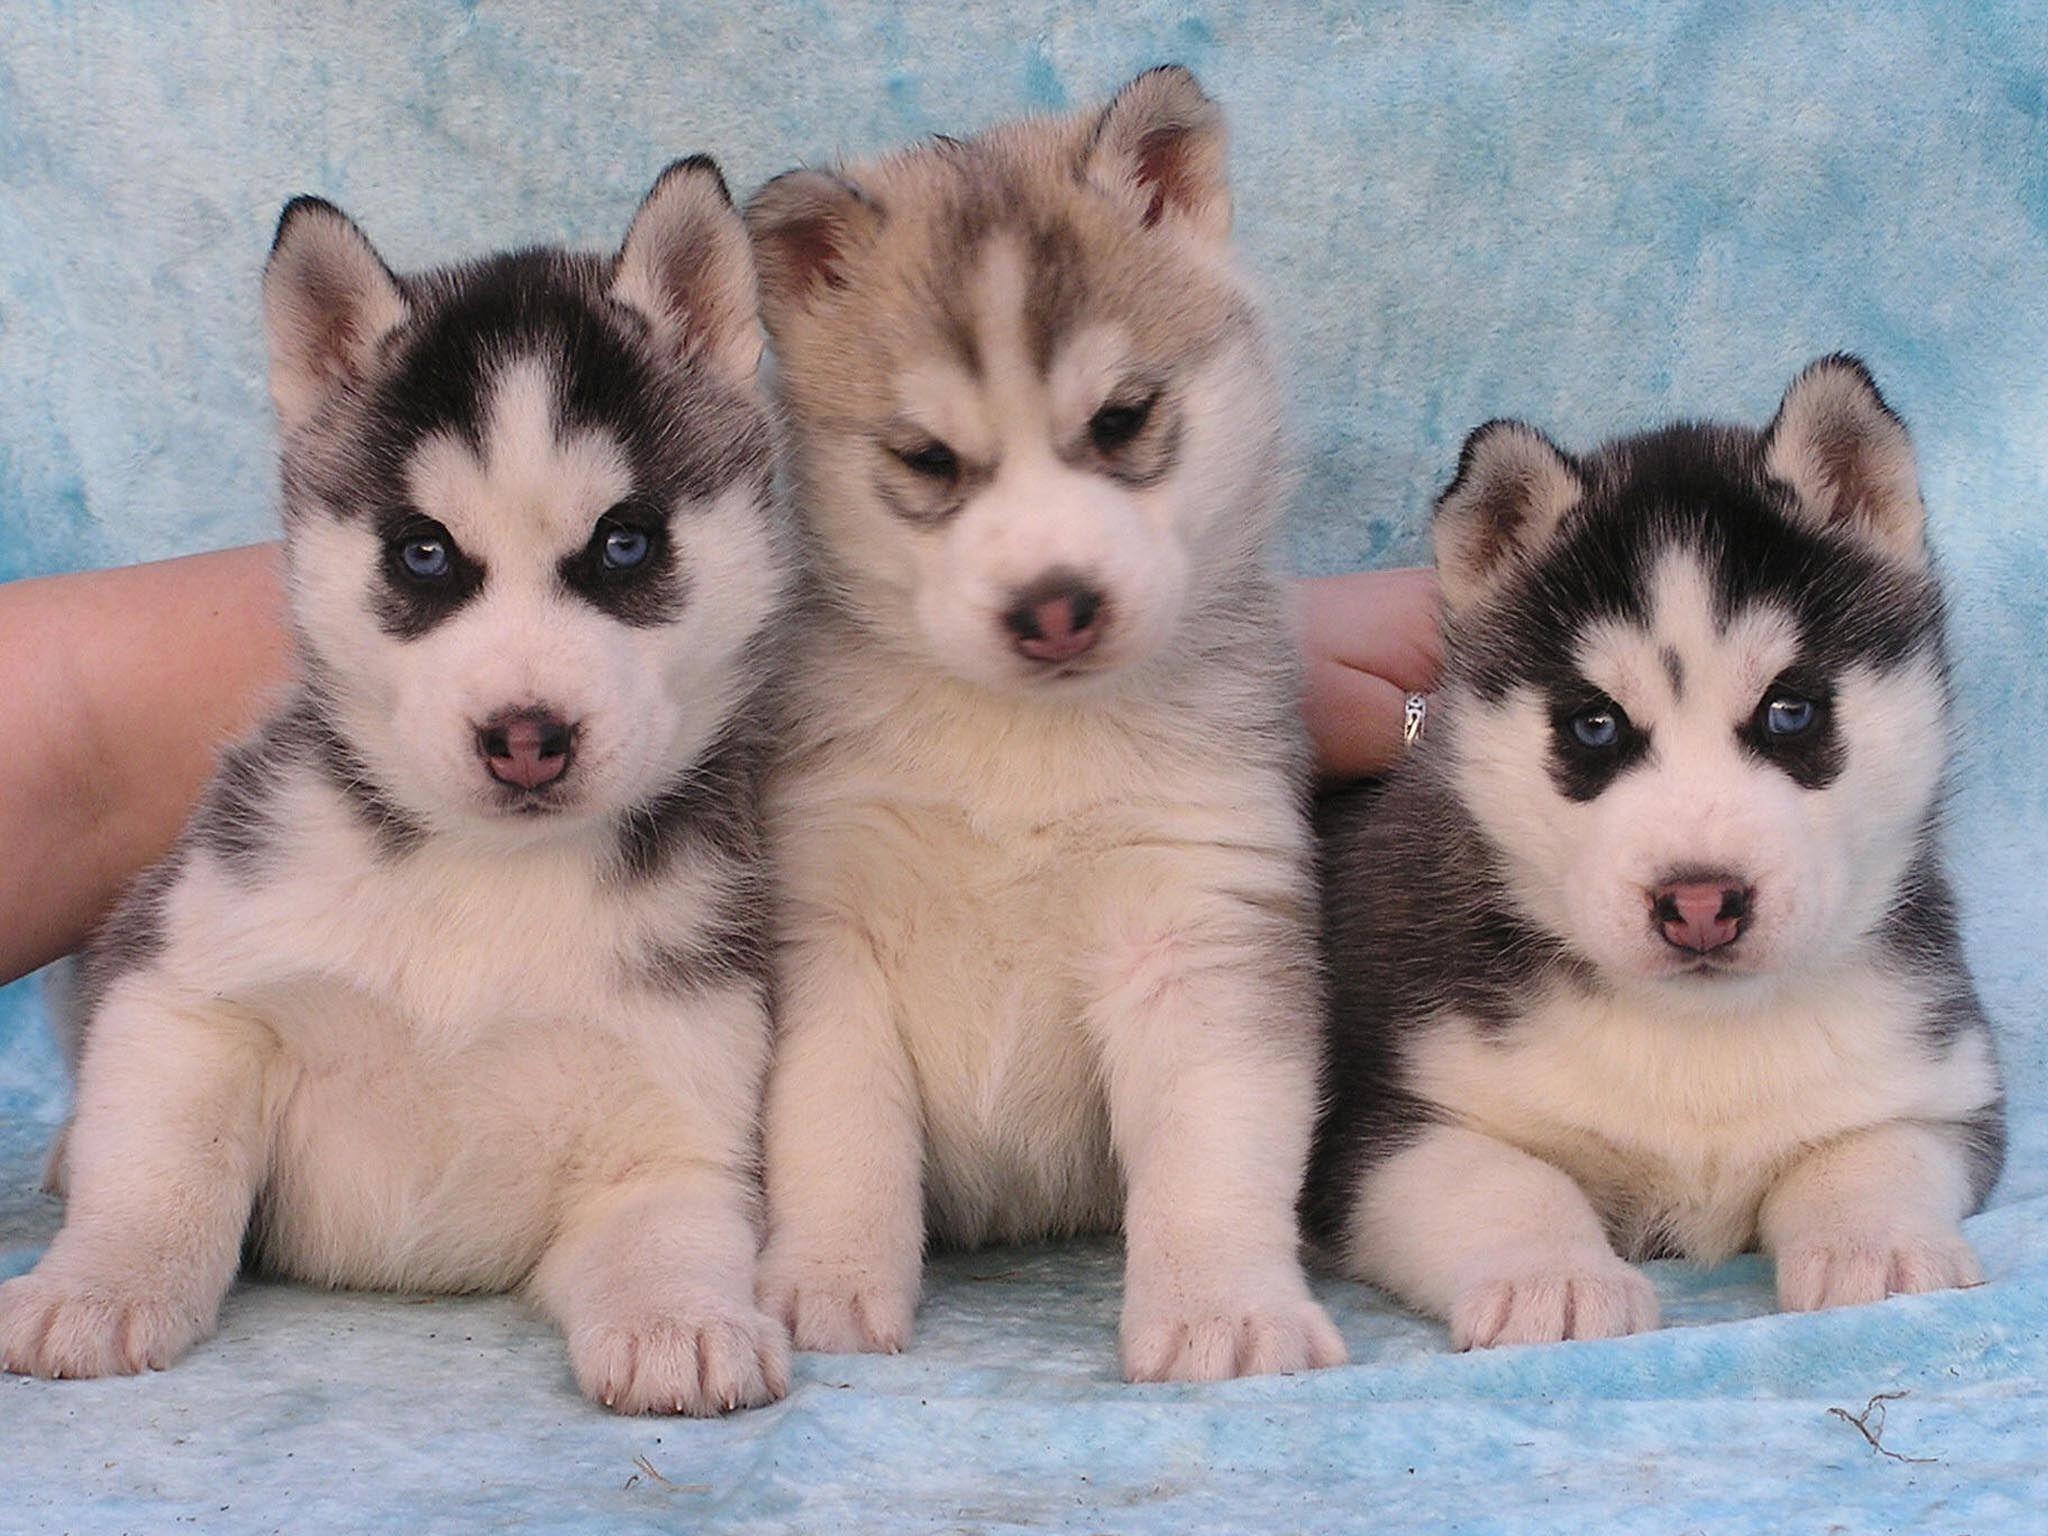 Husky Puppy Wallpaper For Computers. Funny Cat & Dog Picture